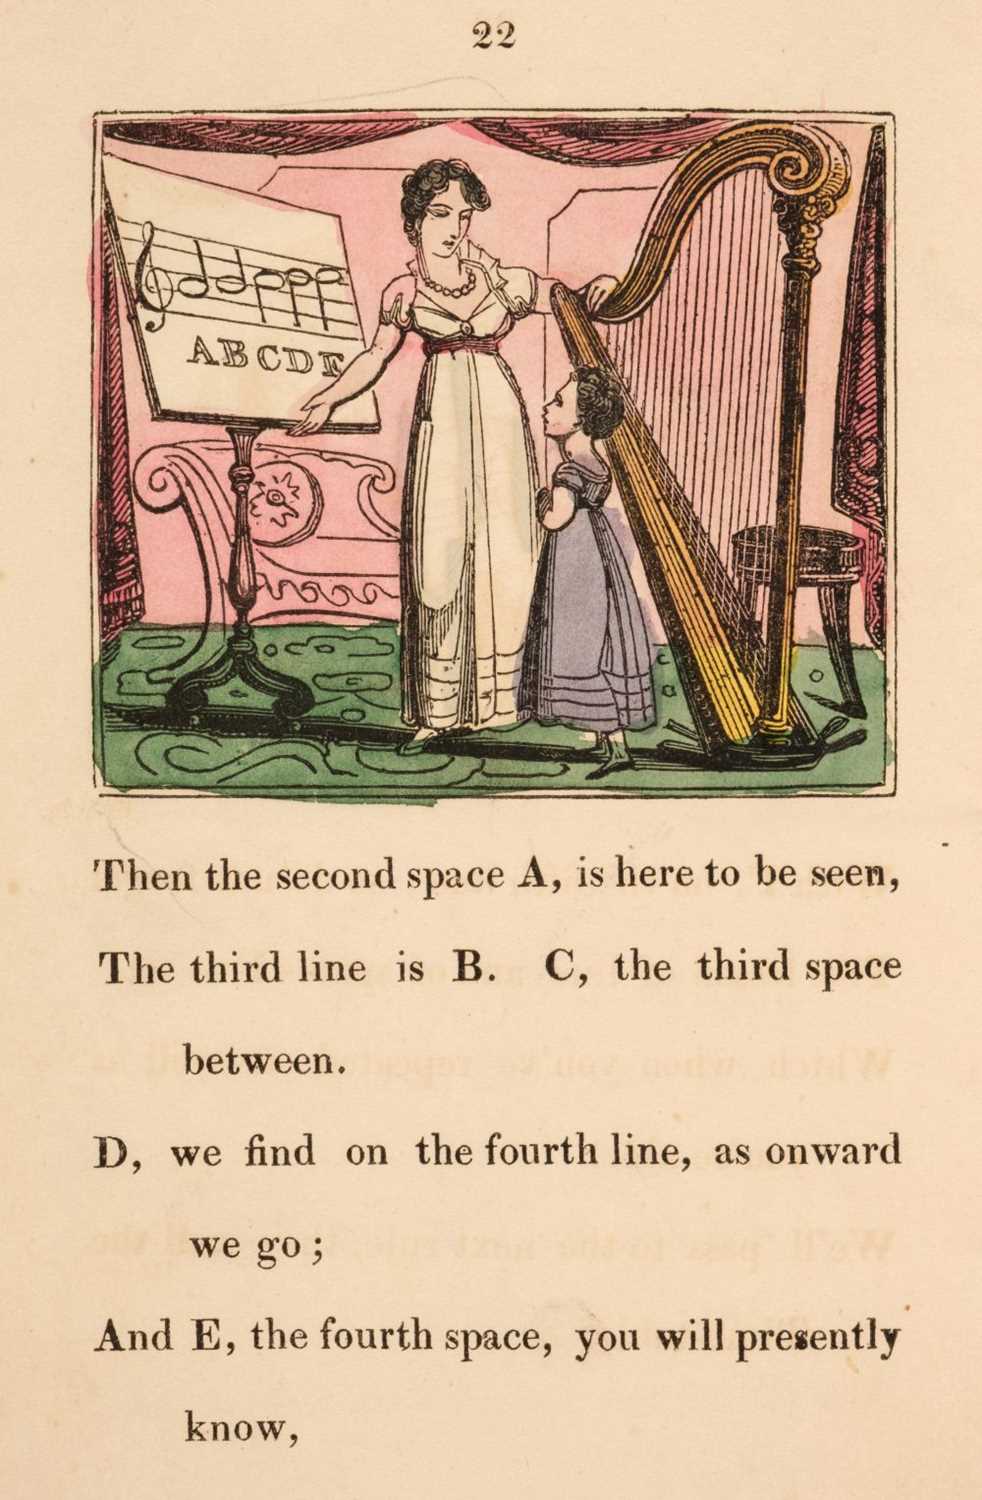 Lot 451 - Dean and Munday. The Gamut and Time-Table, in Verse, by C. Finch, circa 1824